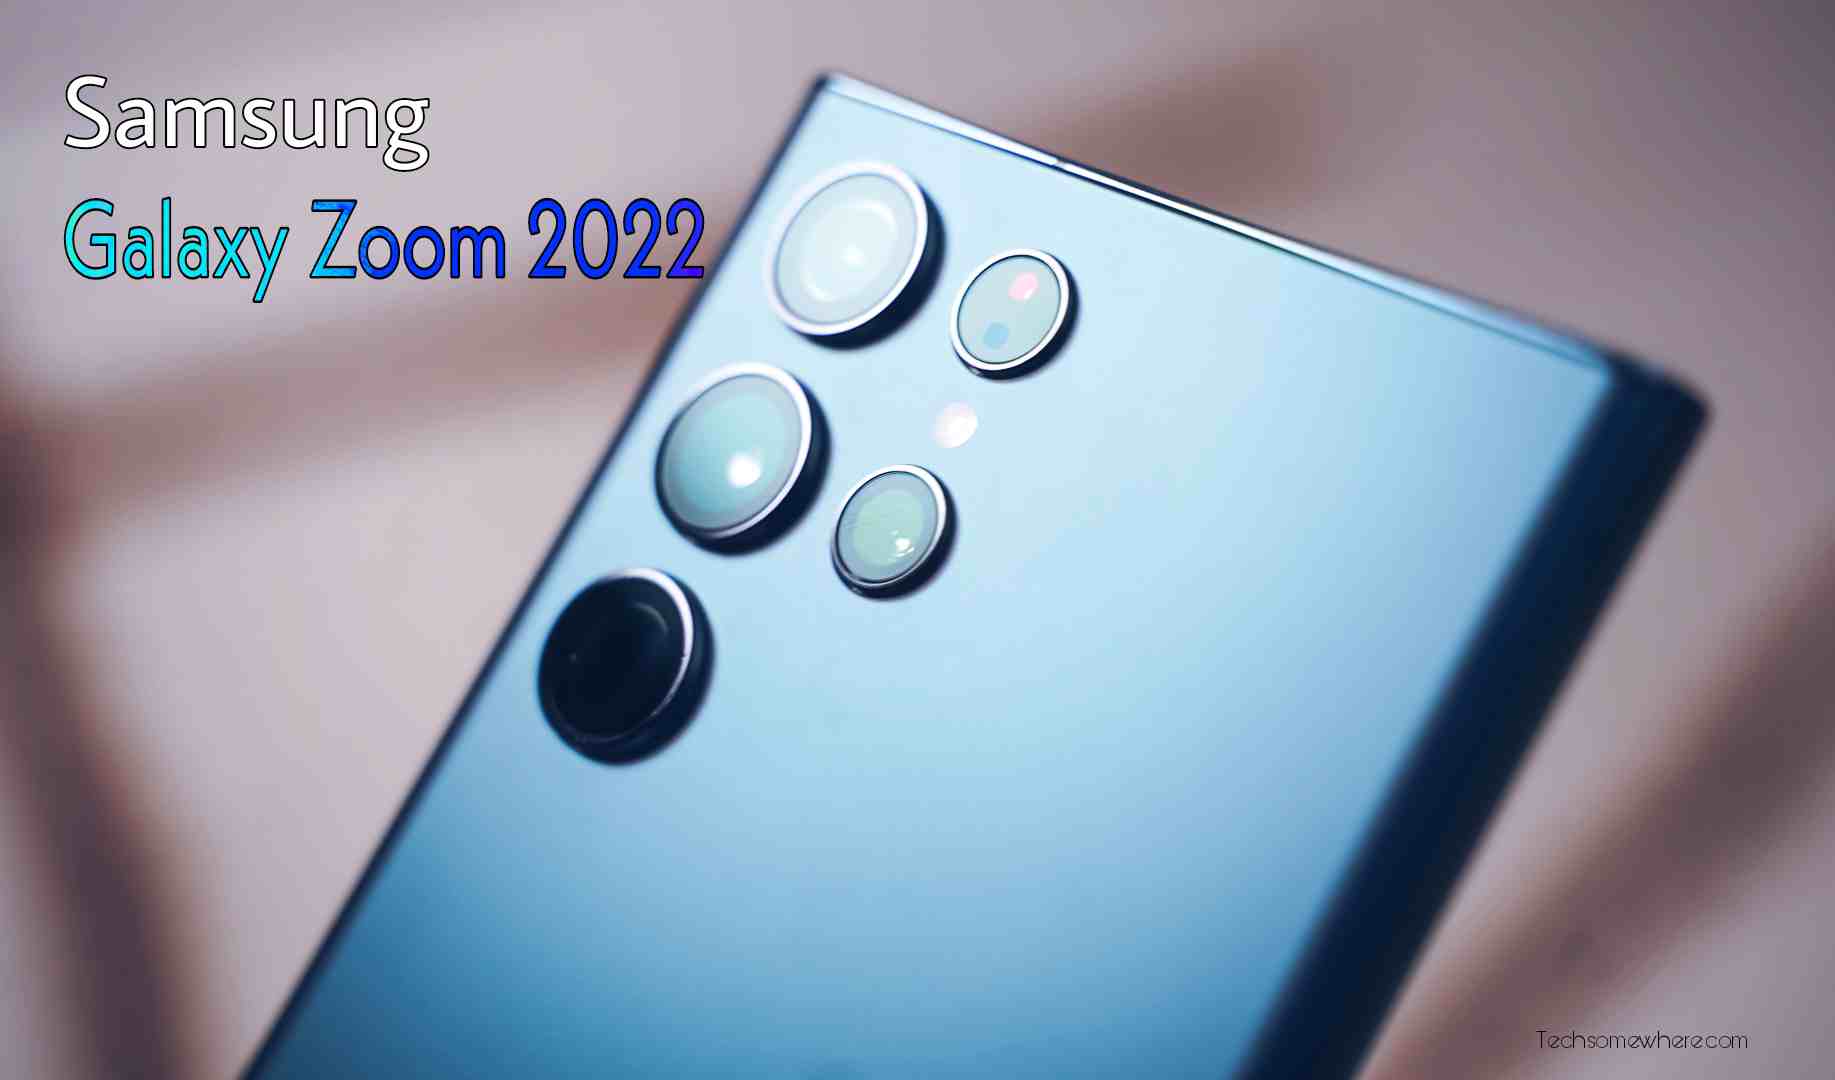 Samsung Galaxy Zoom 2022 Price, Amazing Specs & Release Date!